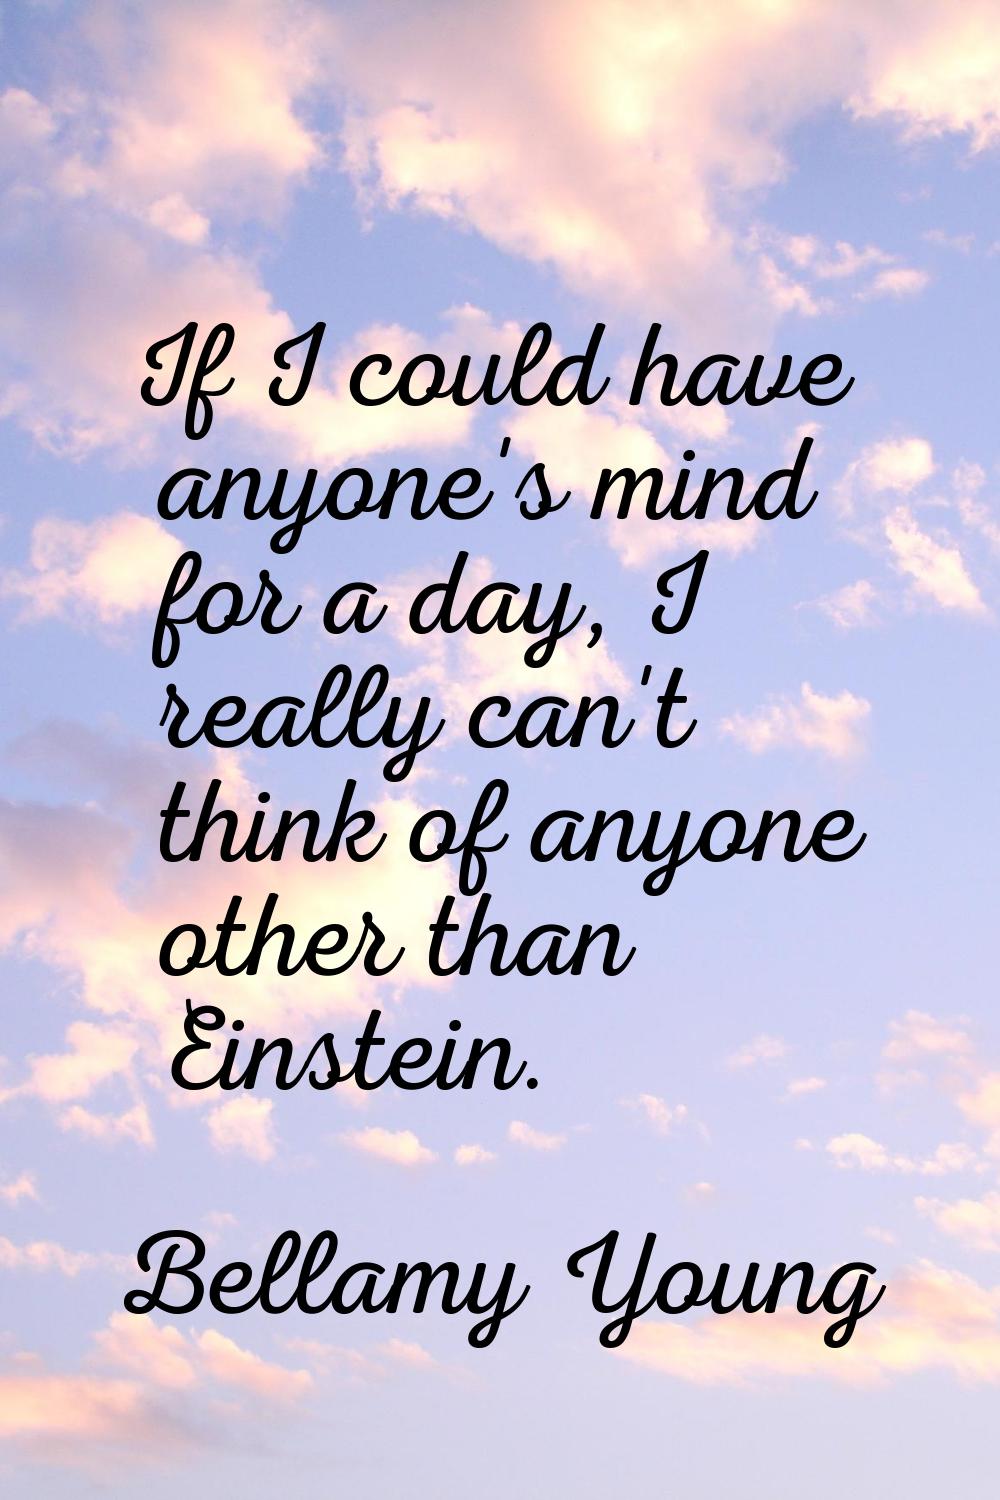 If I could have anyone's mind for a day, I really can't think of anyone other than Einstein.